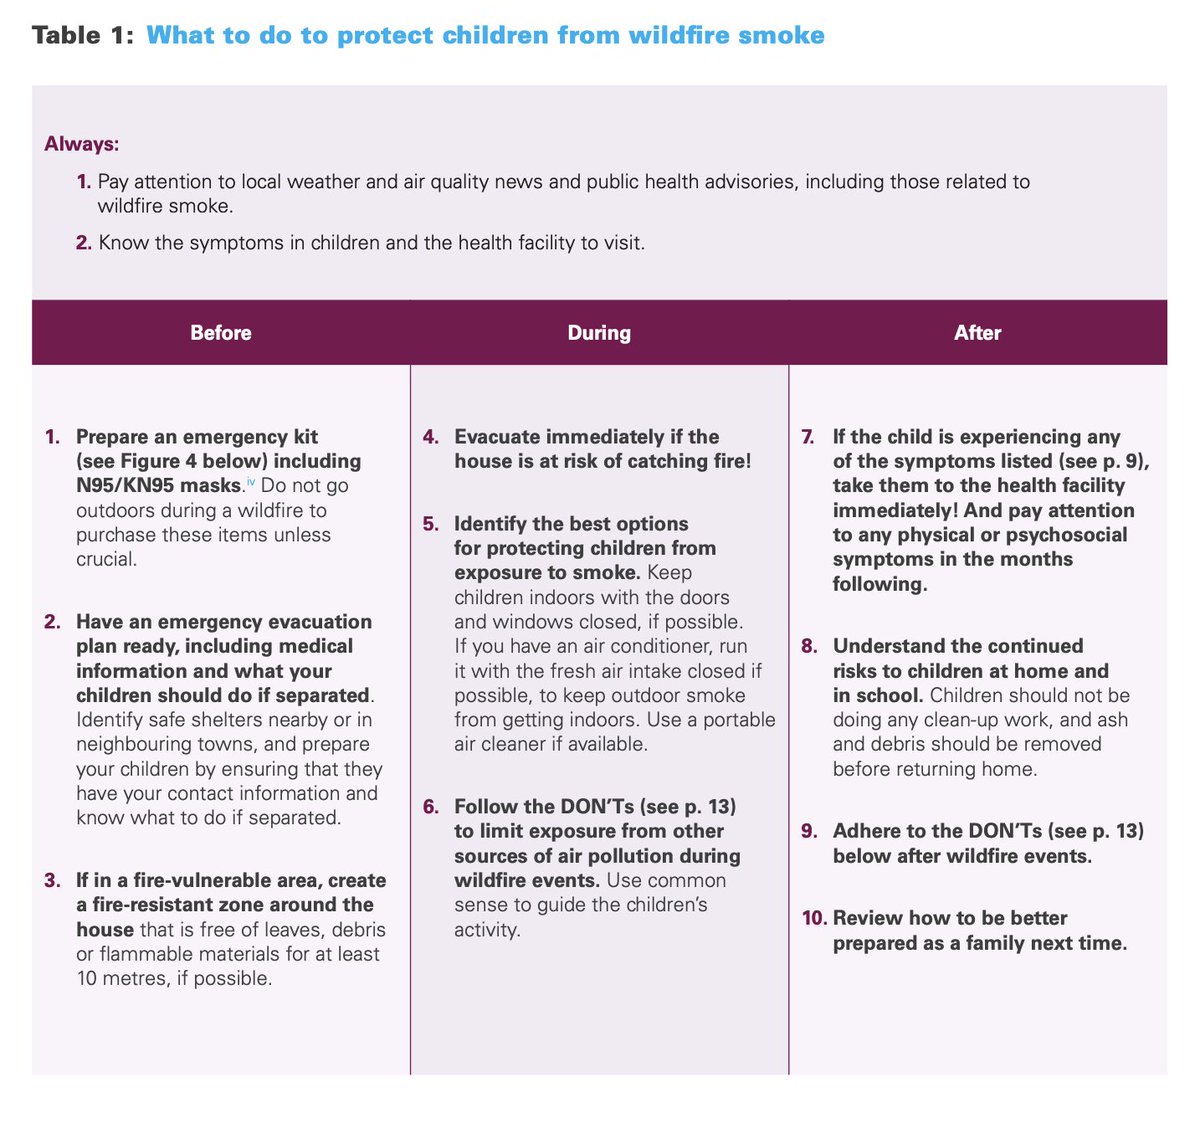 Really great new guidance from @UNICEF about how to take care of children during #wildfire season. @CPHA_ACSP @CFPC_e @Royal_College @CMA_Docs @picardonhealth @CAPE_ACME @CanPaedSociety @GCHAlliance unicef.org/documents/safe….